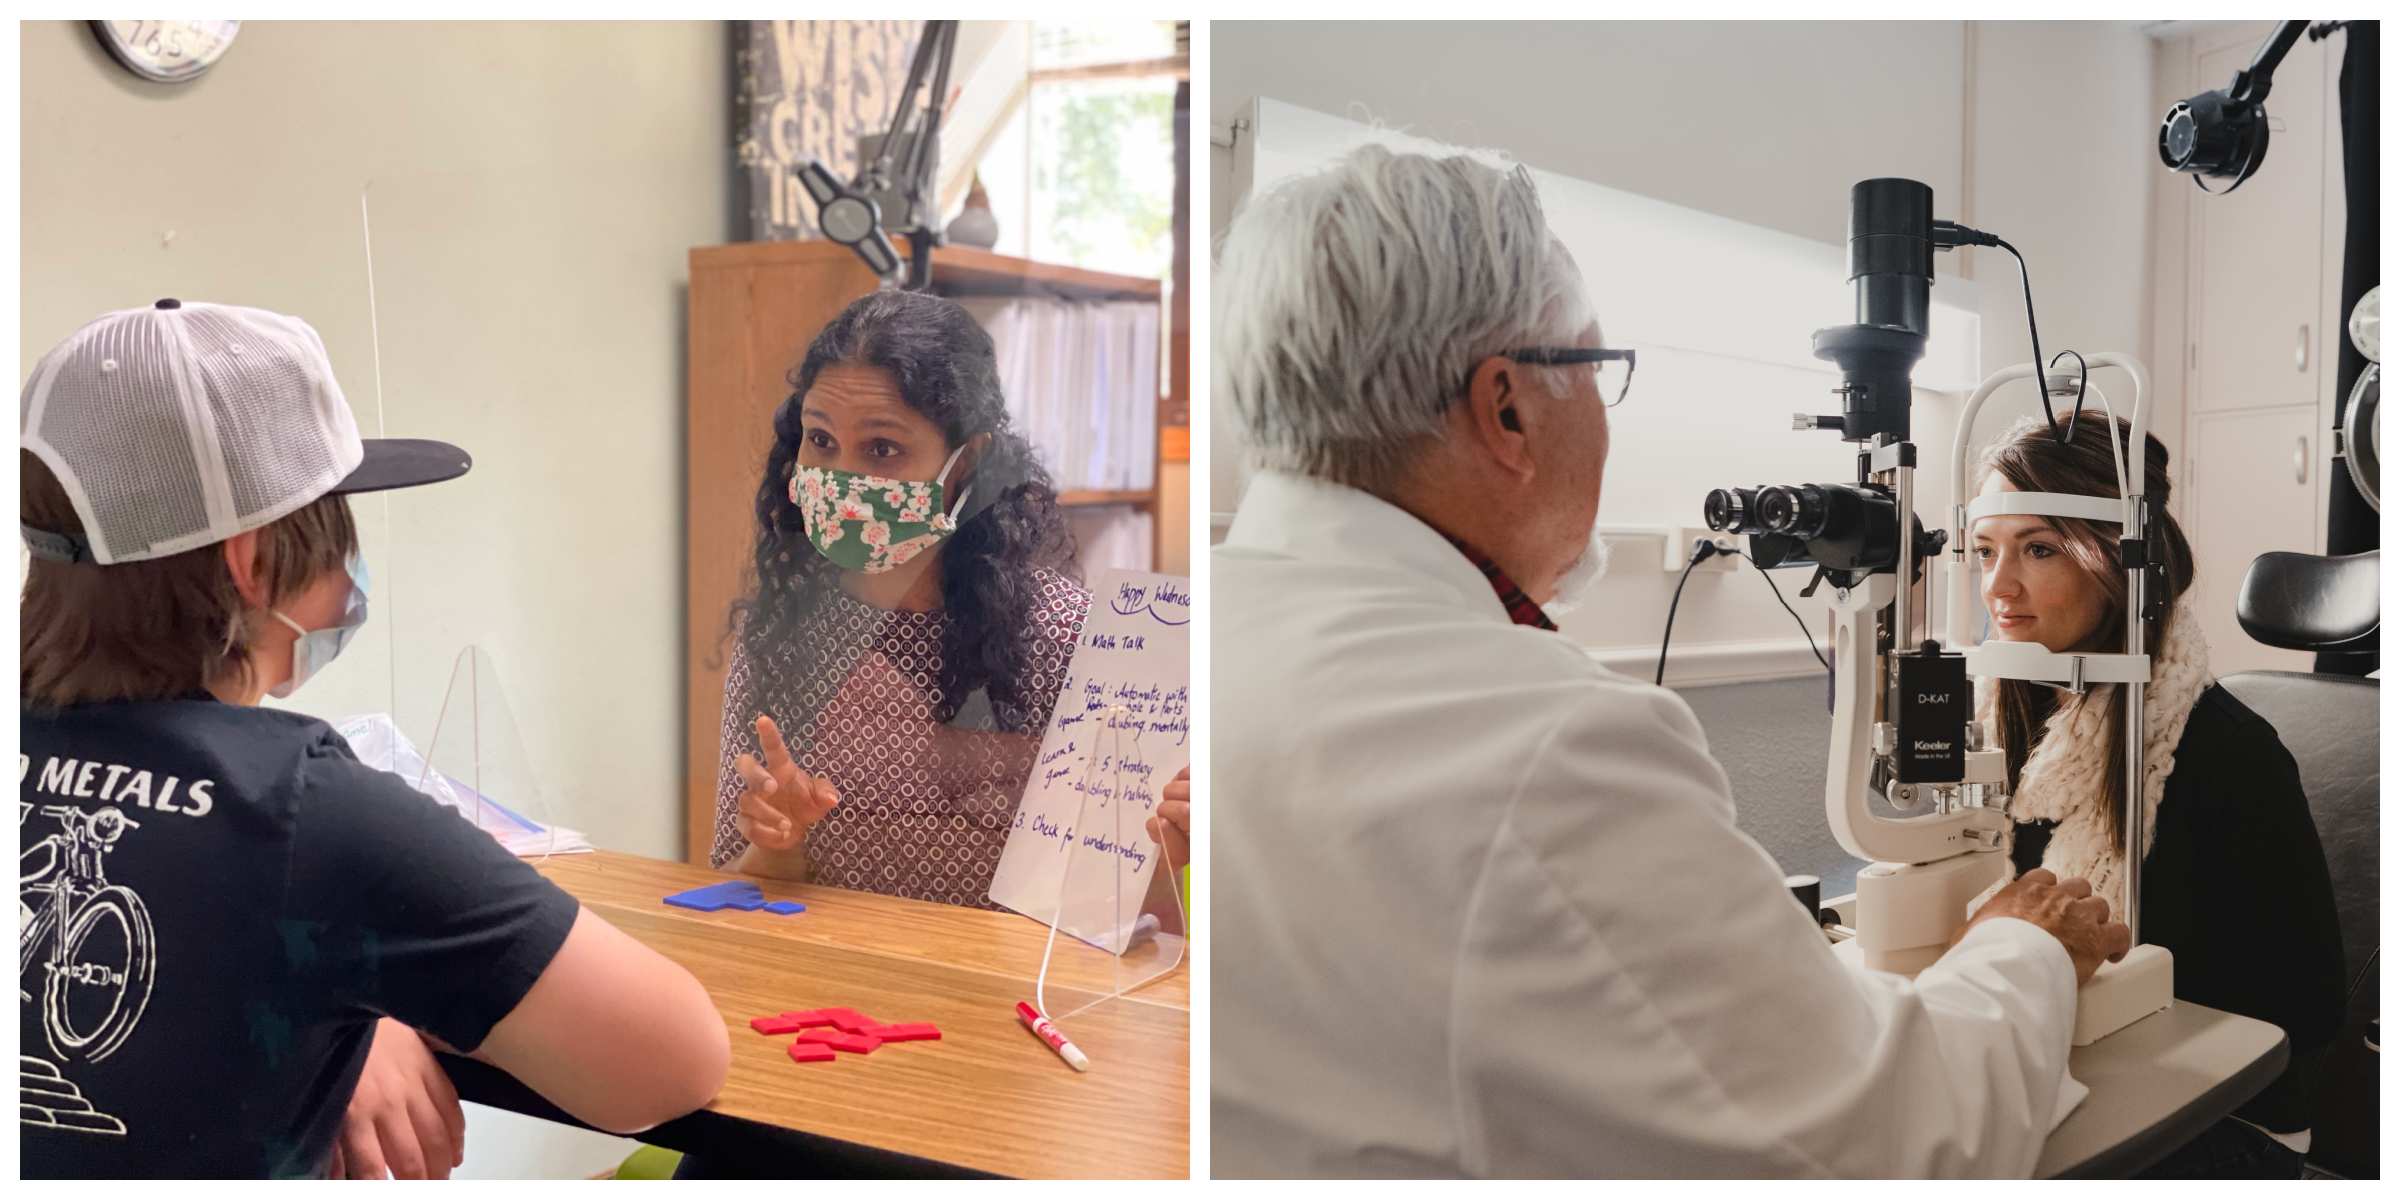 Image 1: a woman talks to a child through a plexiglass divider. Image 2: A man in a white coat with a woman whose head is hooked up to a machine. 